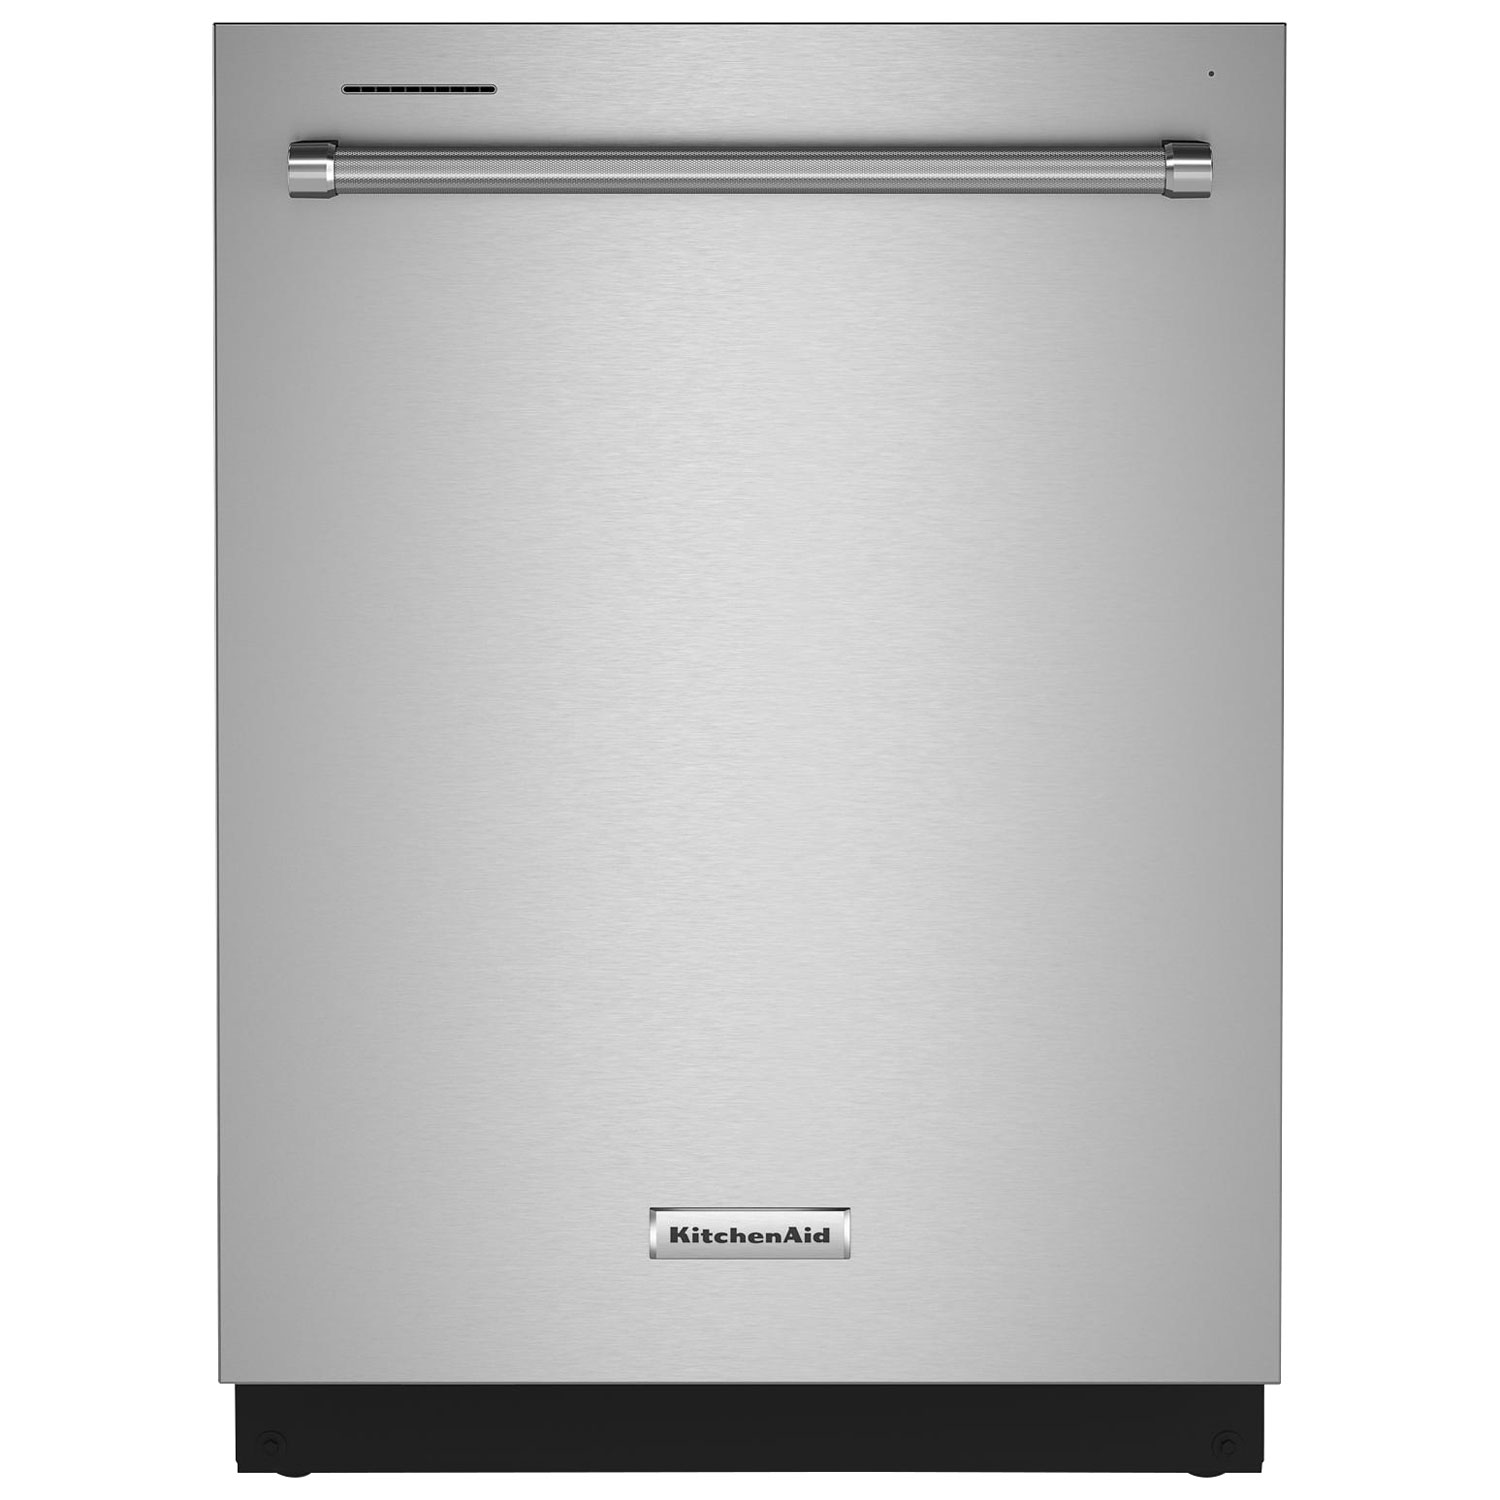 KitchenAid 24" 39dB Built-In Dishwasher with Third Rack (KDTE204KPS) - Stainless Steel